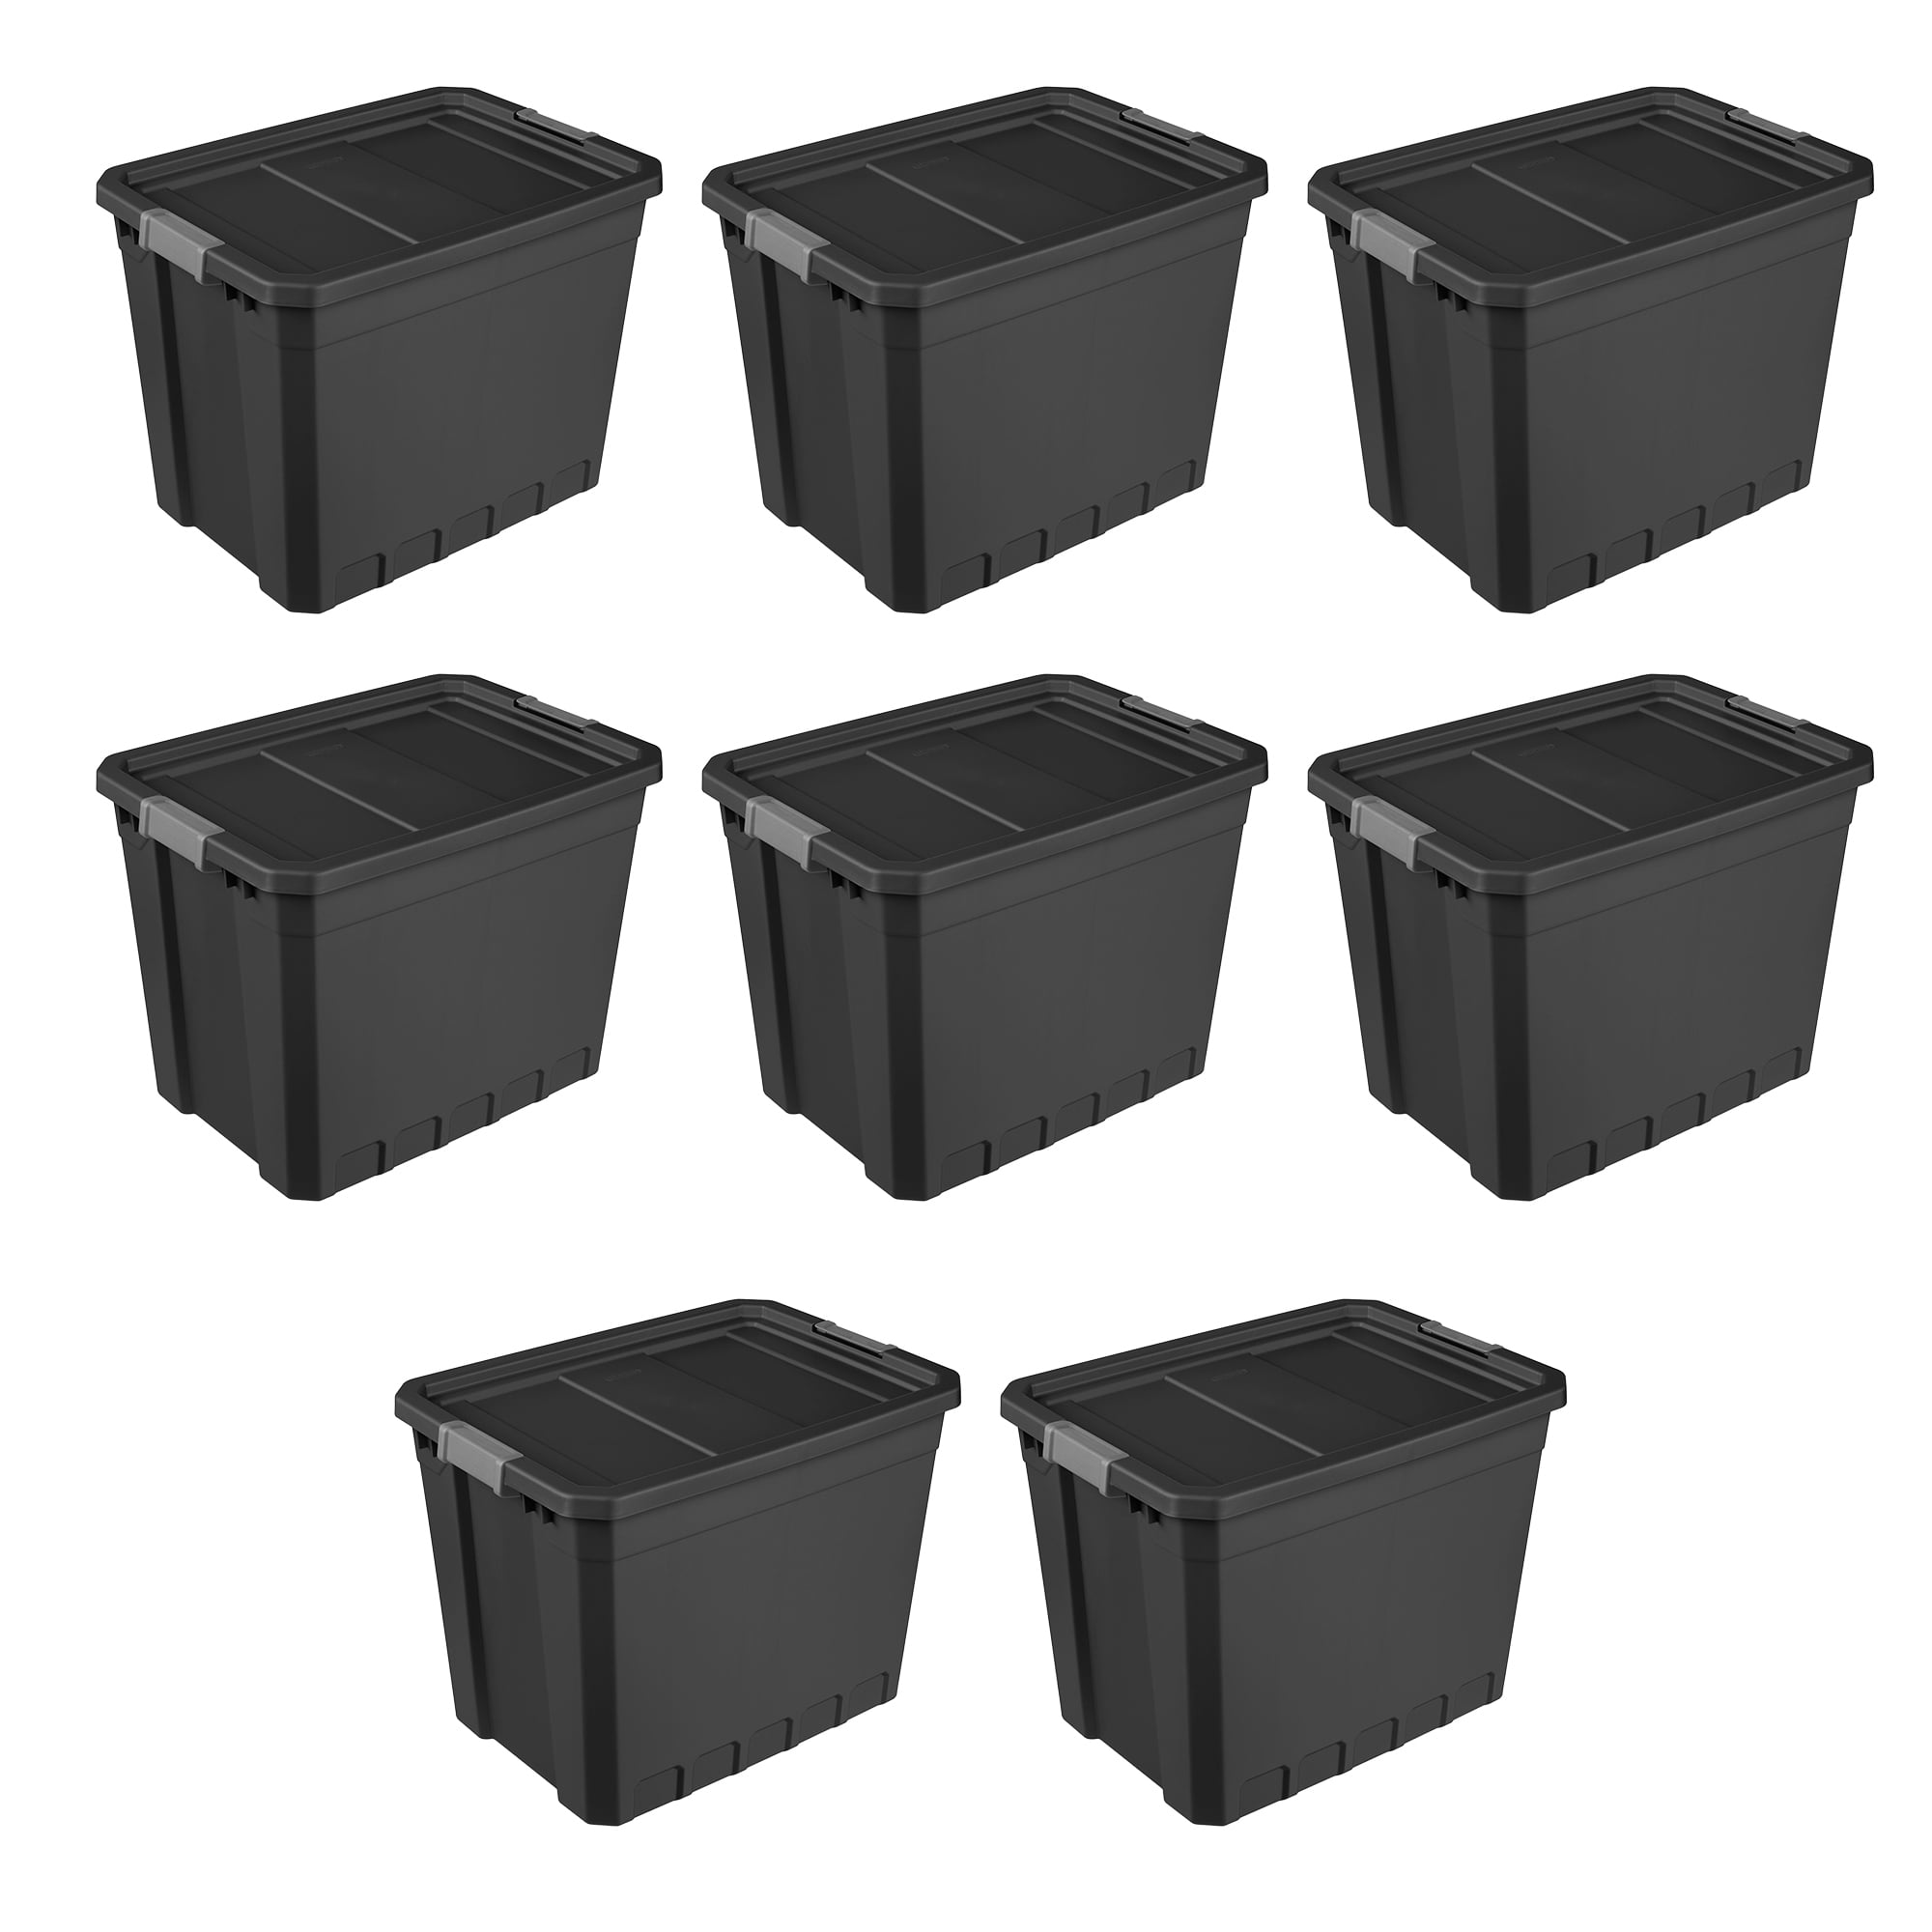 STORAGE CONTAINERS Heavy Duty with Lid 7-27 Gallon Sizes Available